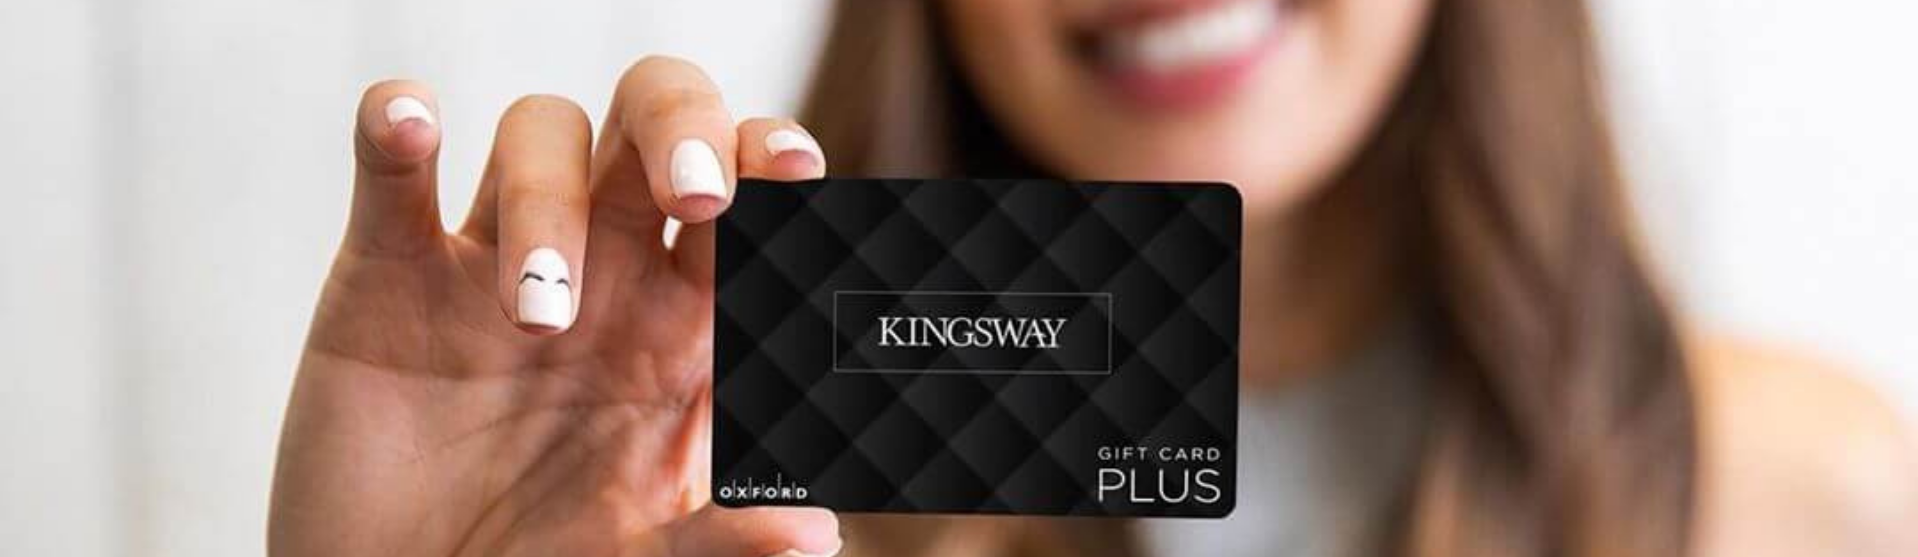 Woman holding up a gift card